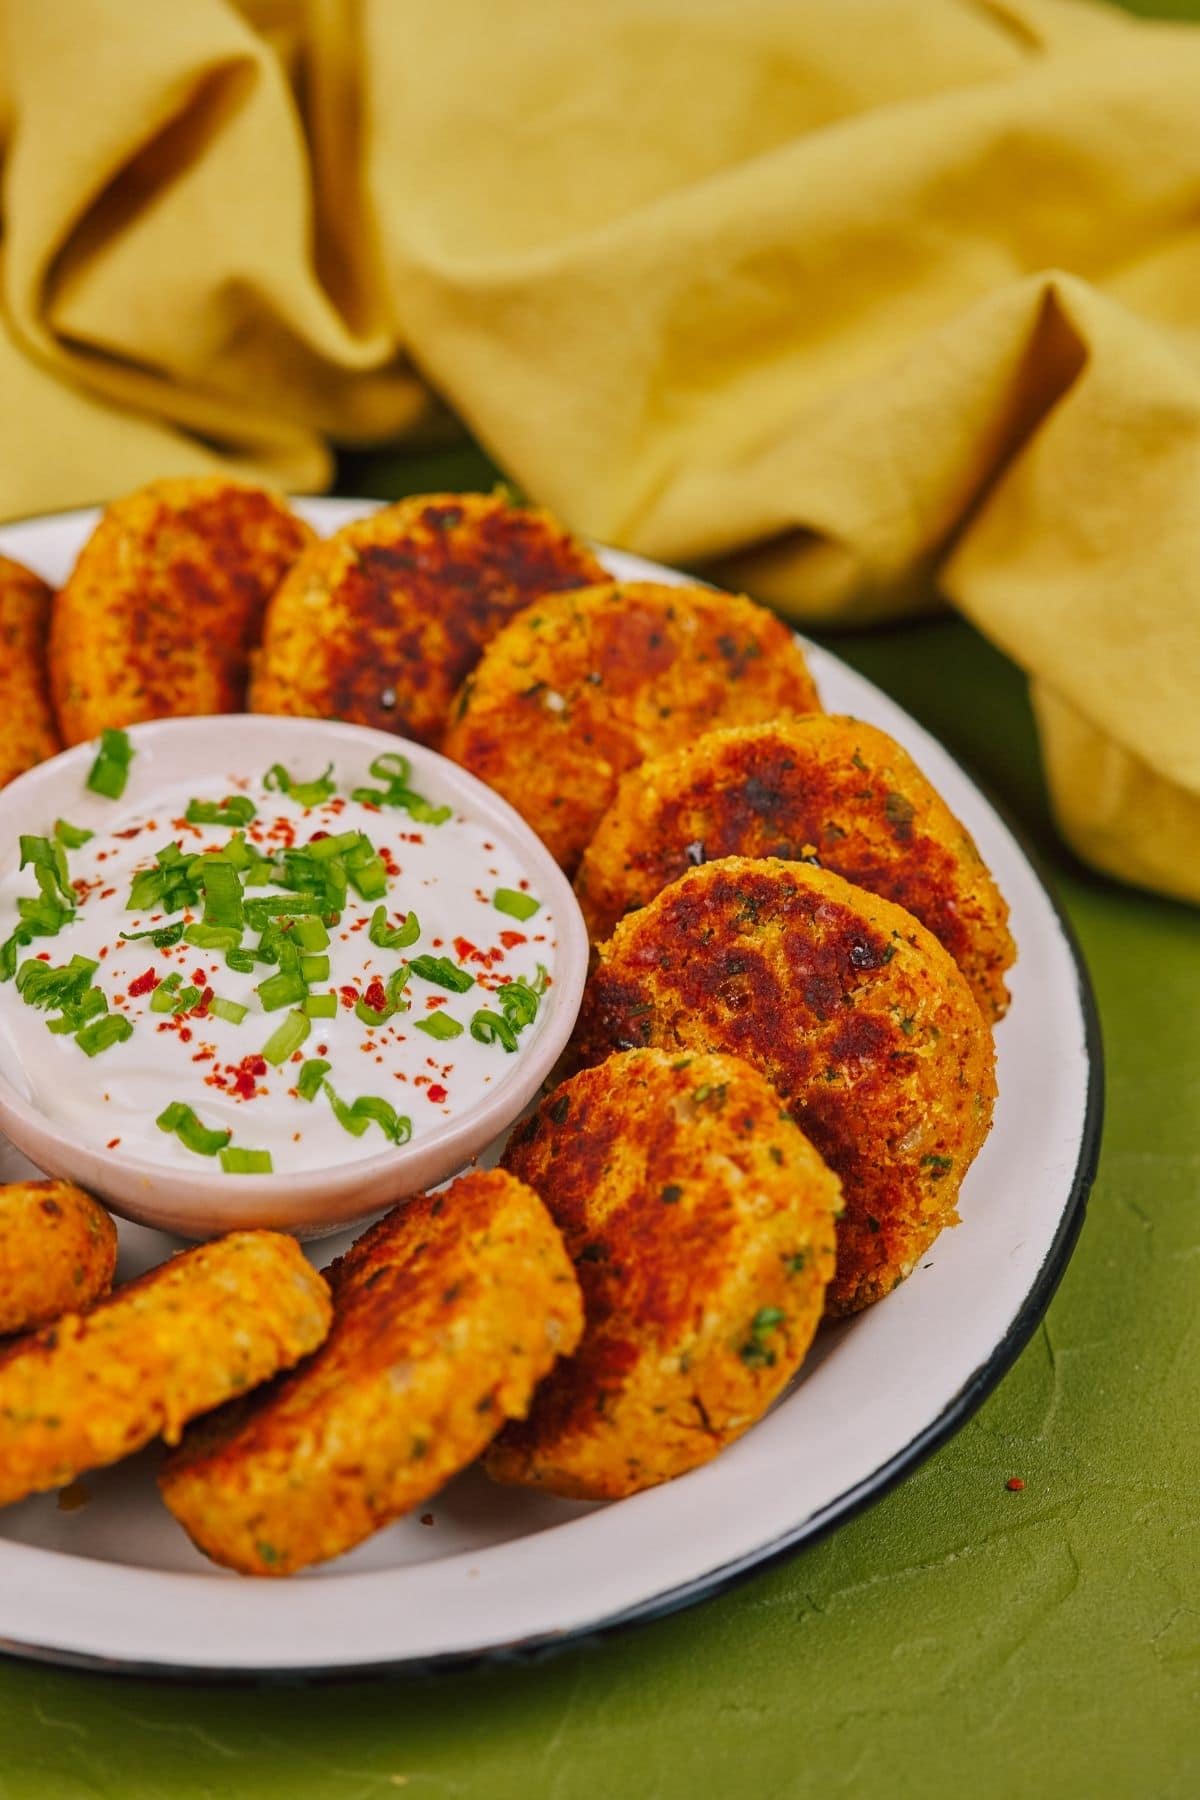 Large white serving plate filled with lentil patties and dipping sauce in bowl in center